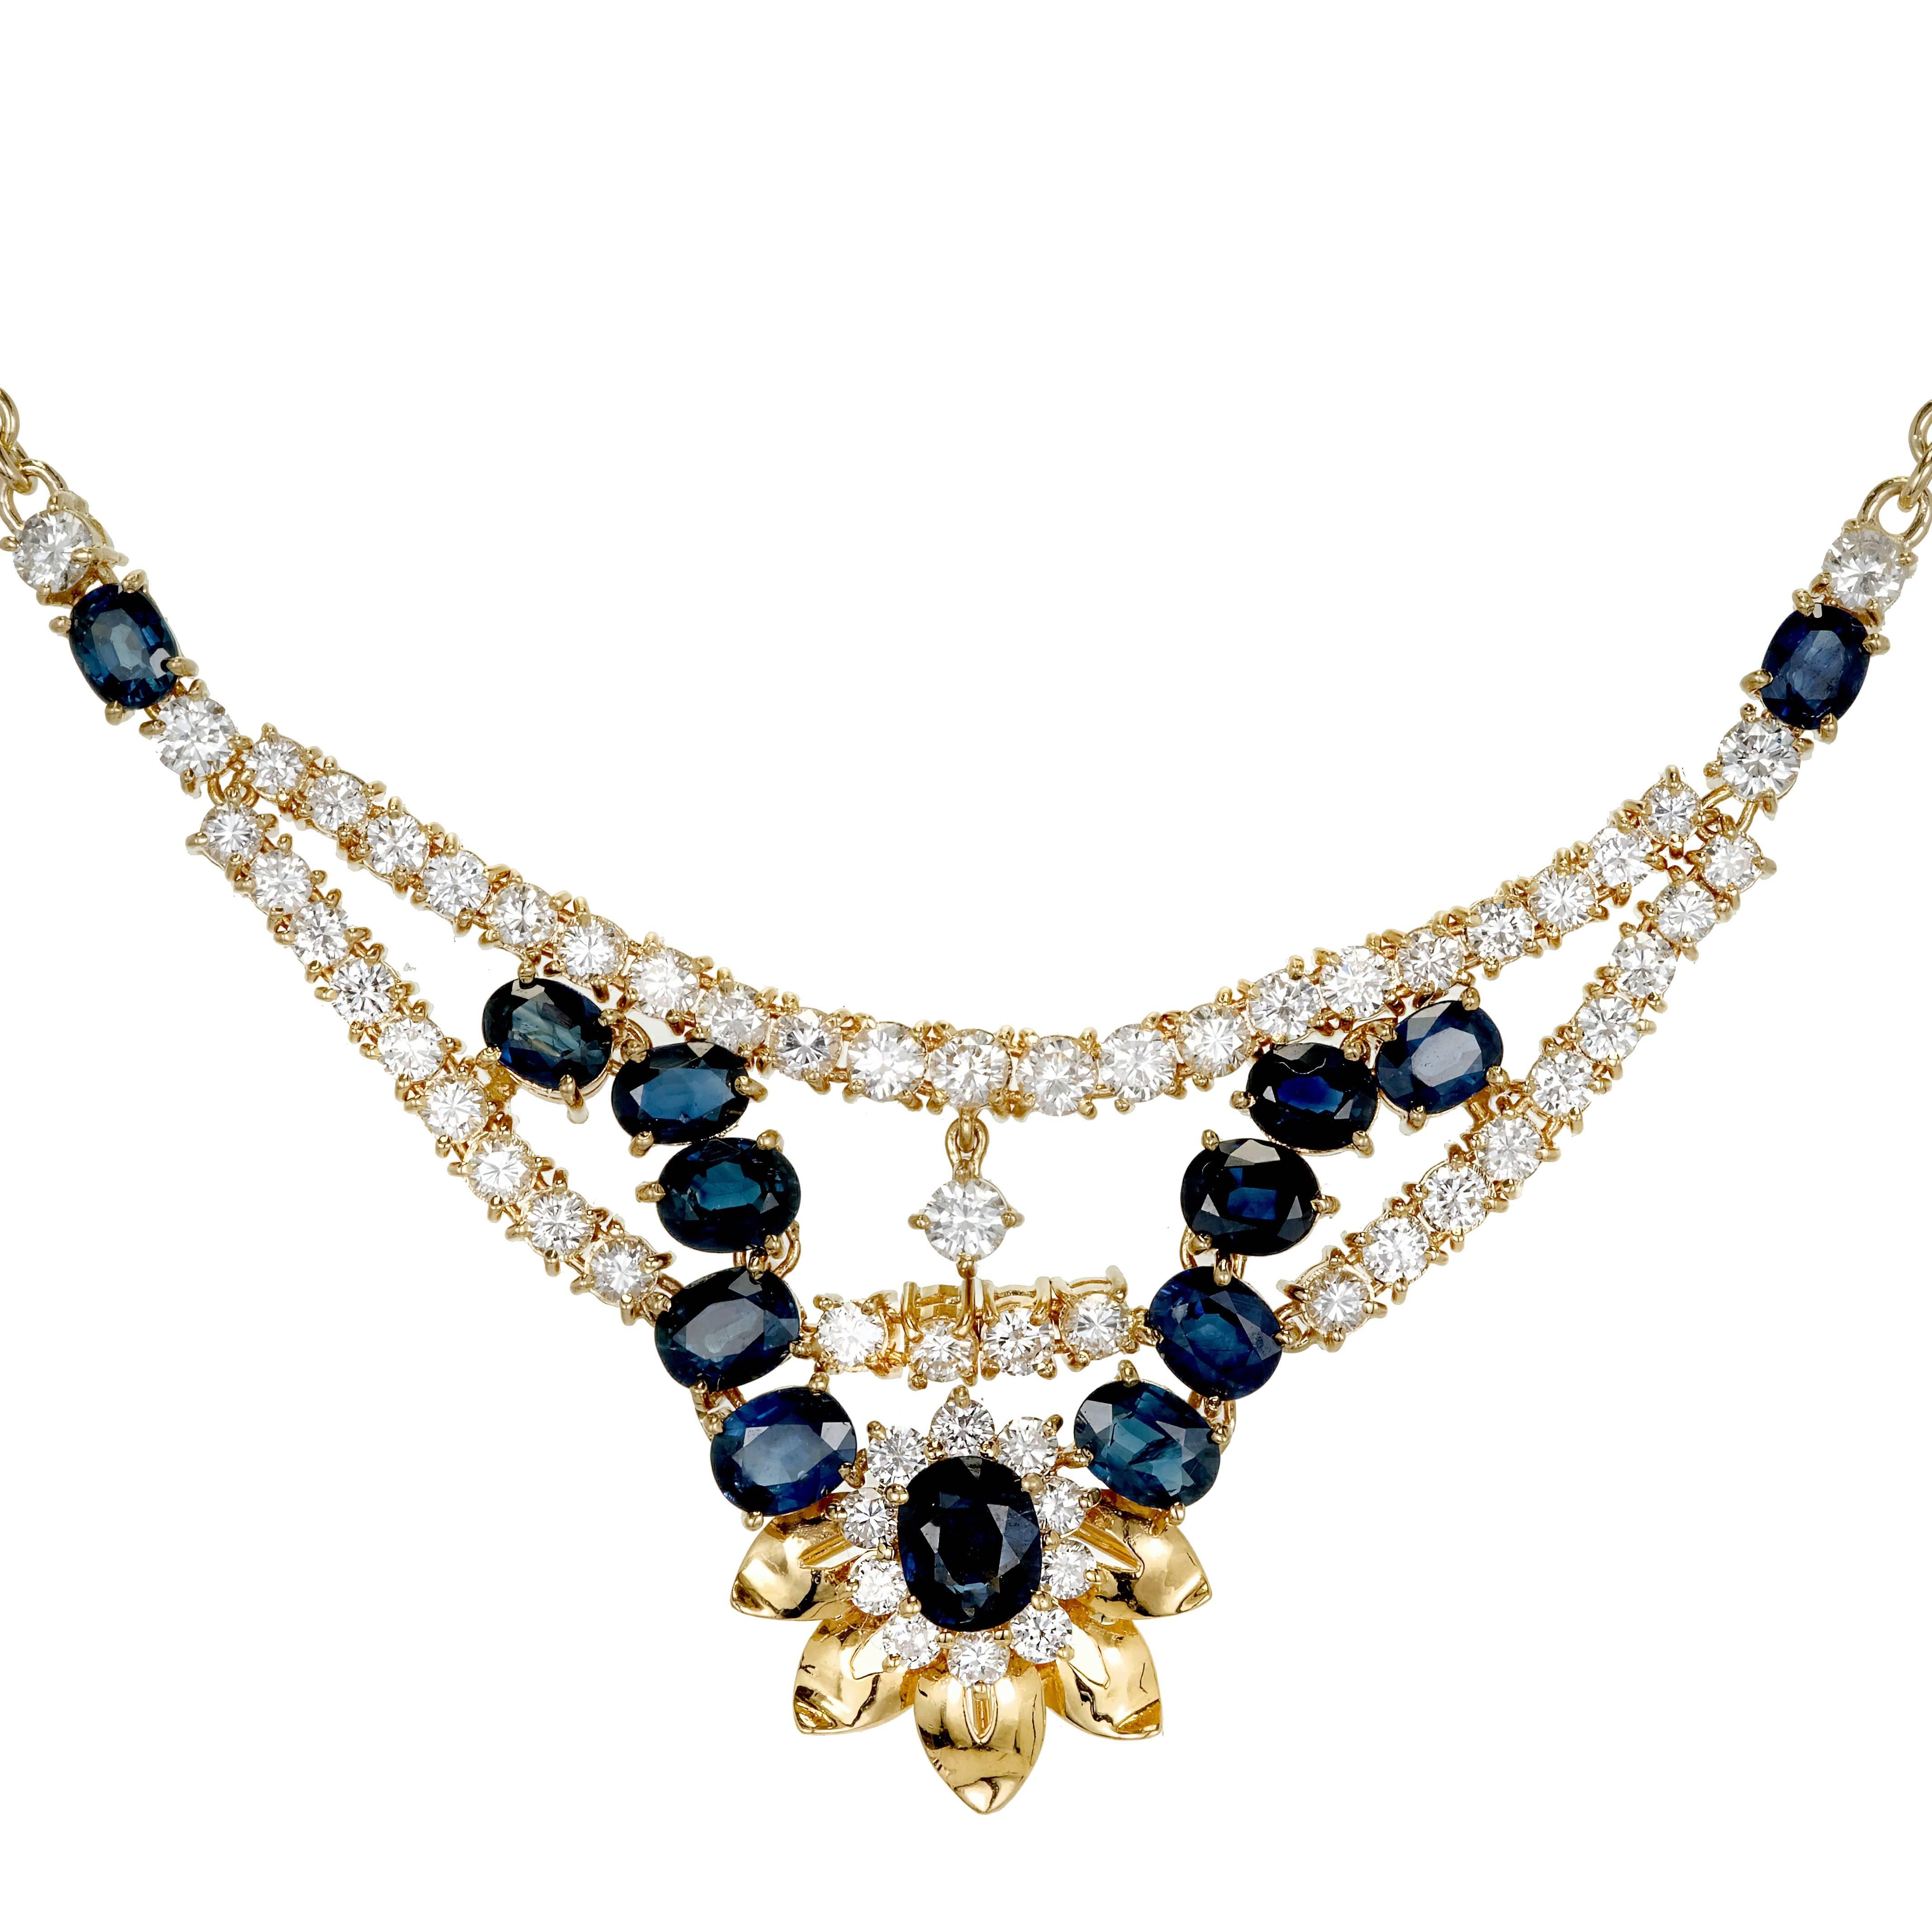 Handmade 18k yellow gold hinged section necklace with fine white bright full cut Diamonds and bright blue natural Sapphires. GIA certified simple heat only no other enhancements. 

58 round full cut Diamonds, approx. total weight 2.00cts, F, VS 
1